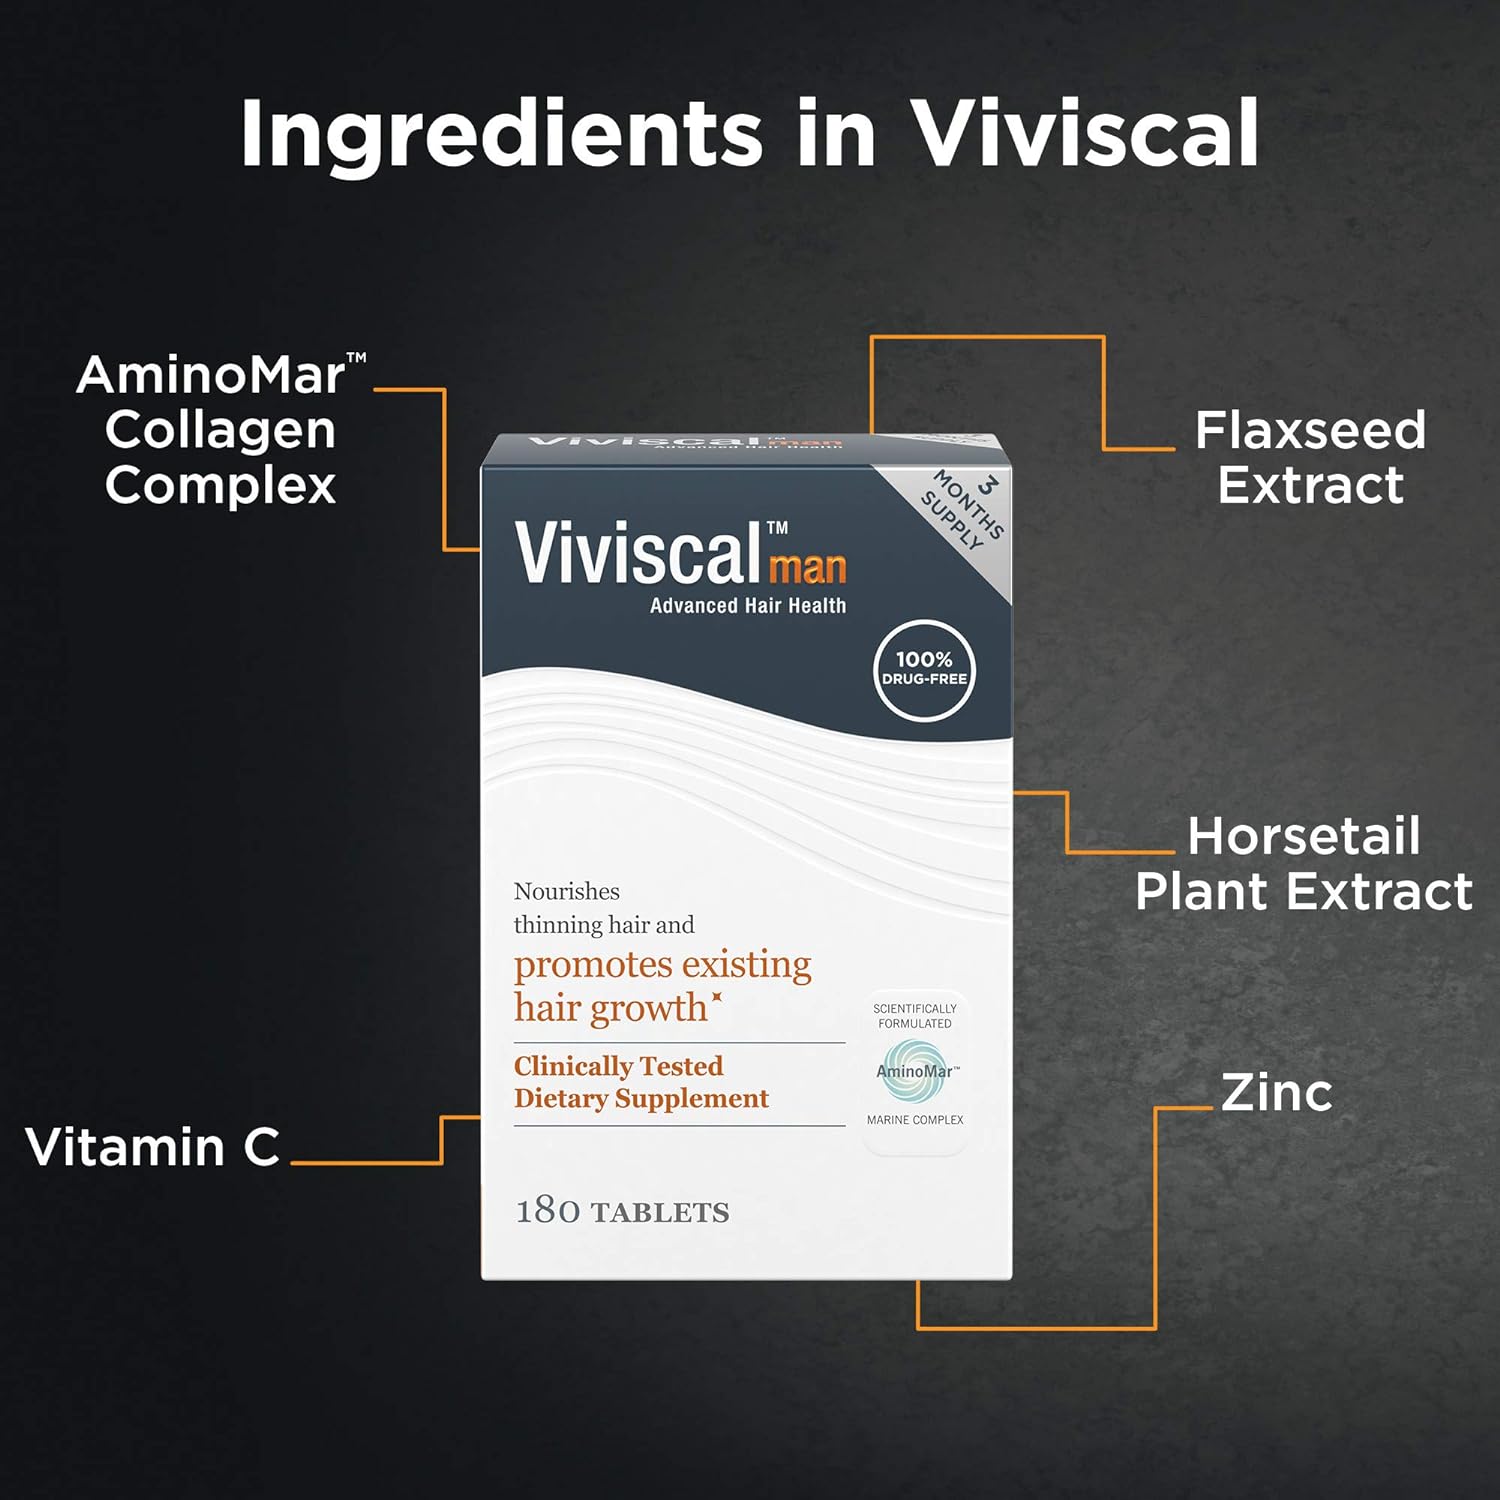 Ingredients in viviscal, AminoMar collagen complex, flaxseed extract, horsetail plant extract, zinc, and vitamin c